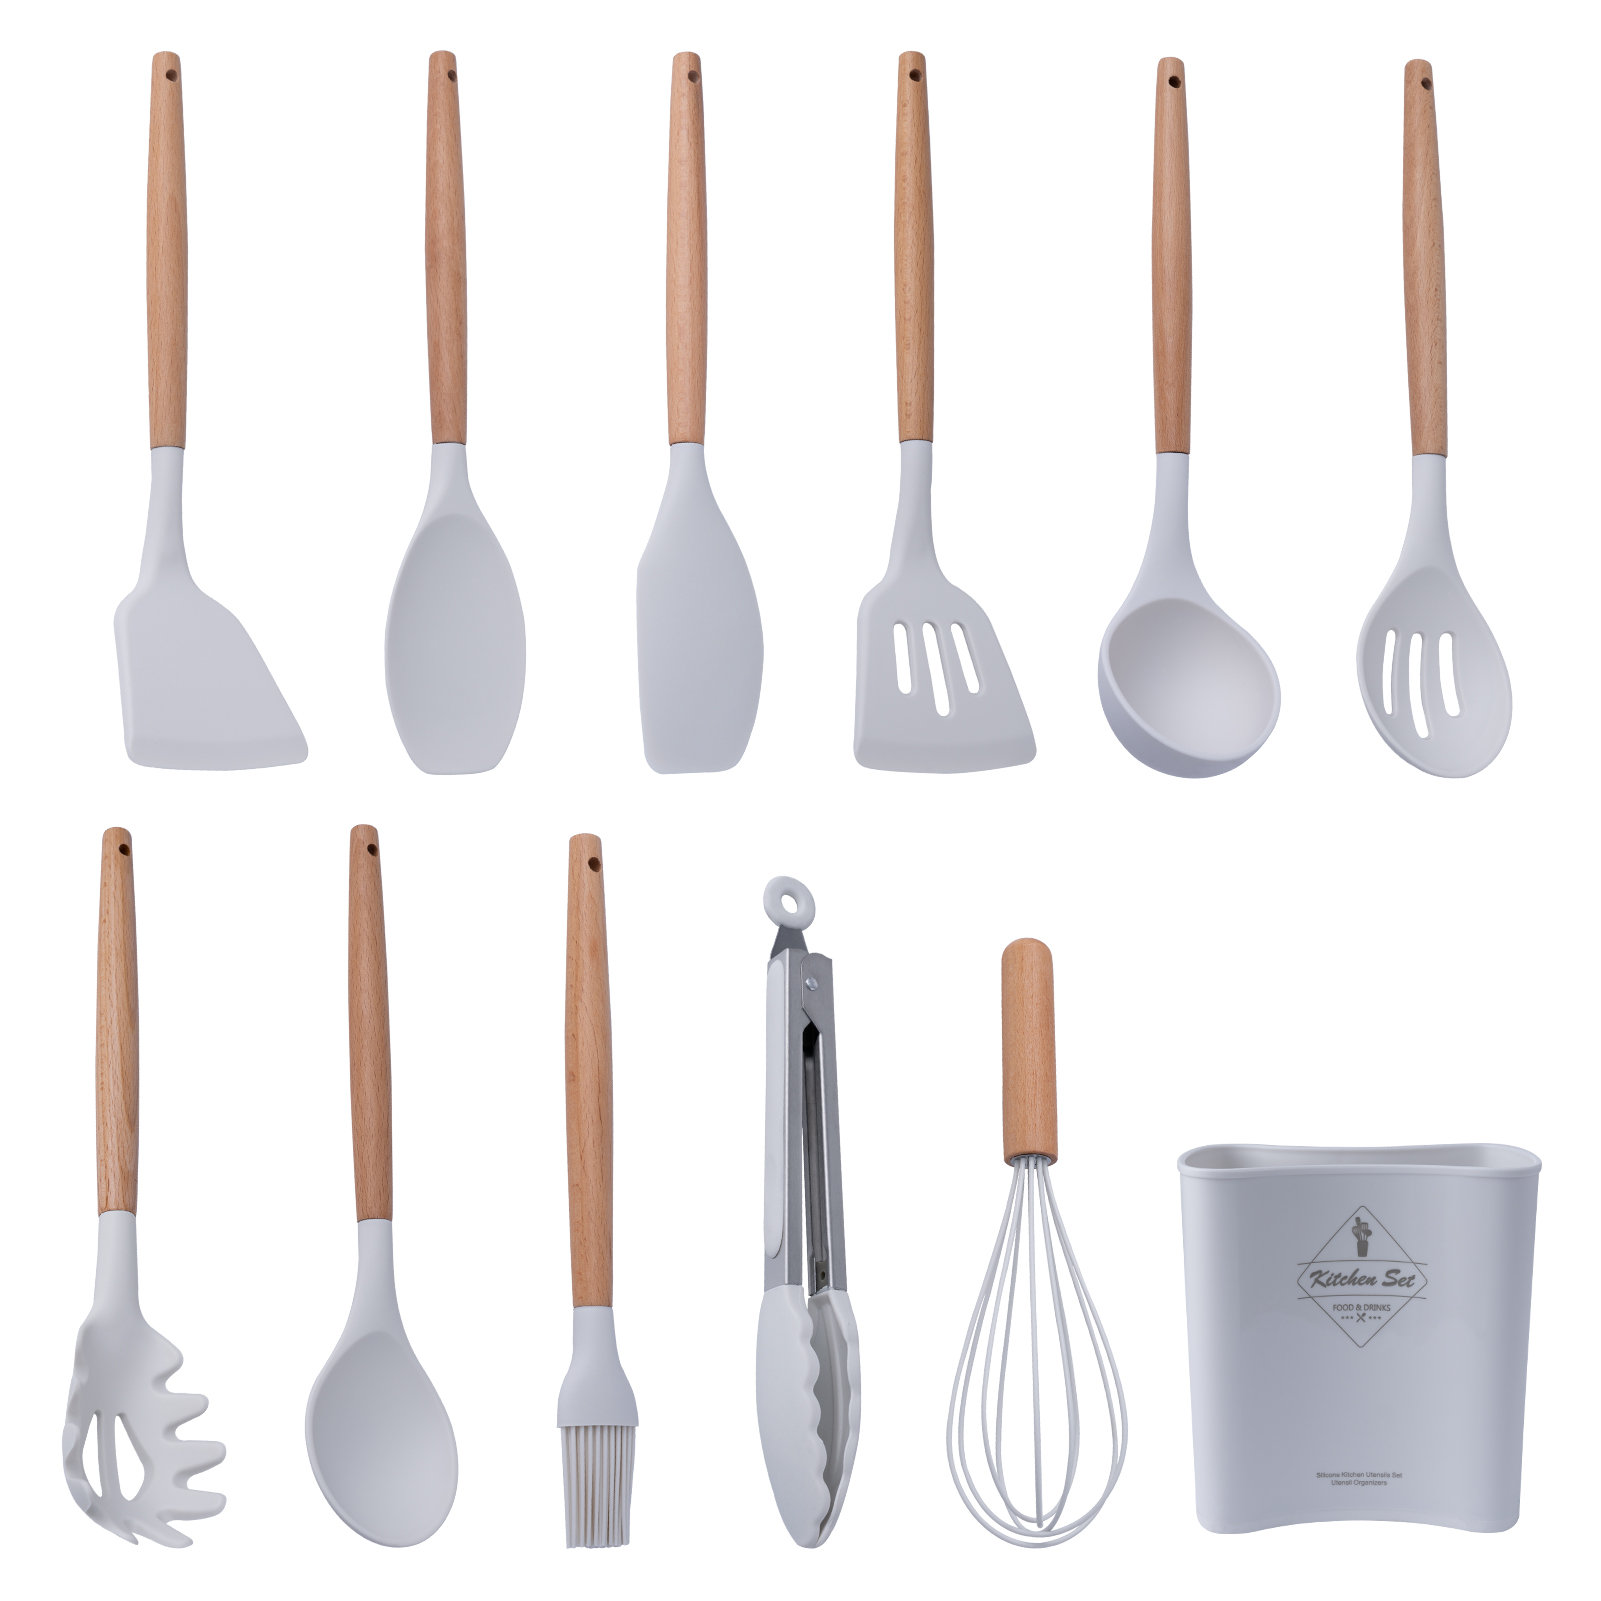 Styled Settings Gold & Pink Kitchen Utensil Set with Holder - Pink Cooking Utensils:Gold Whisk,Gold Ladle,Pink Spatula,Gold Tongs,Pink Spoon,Turner